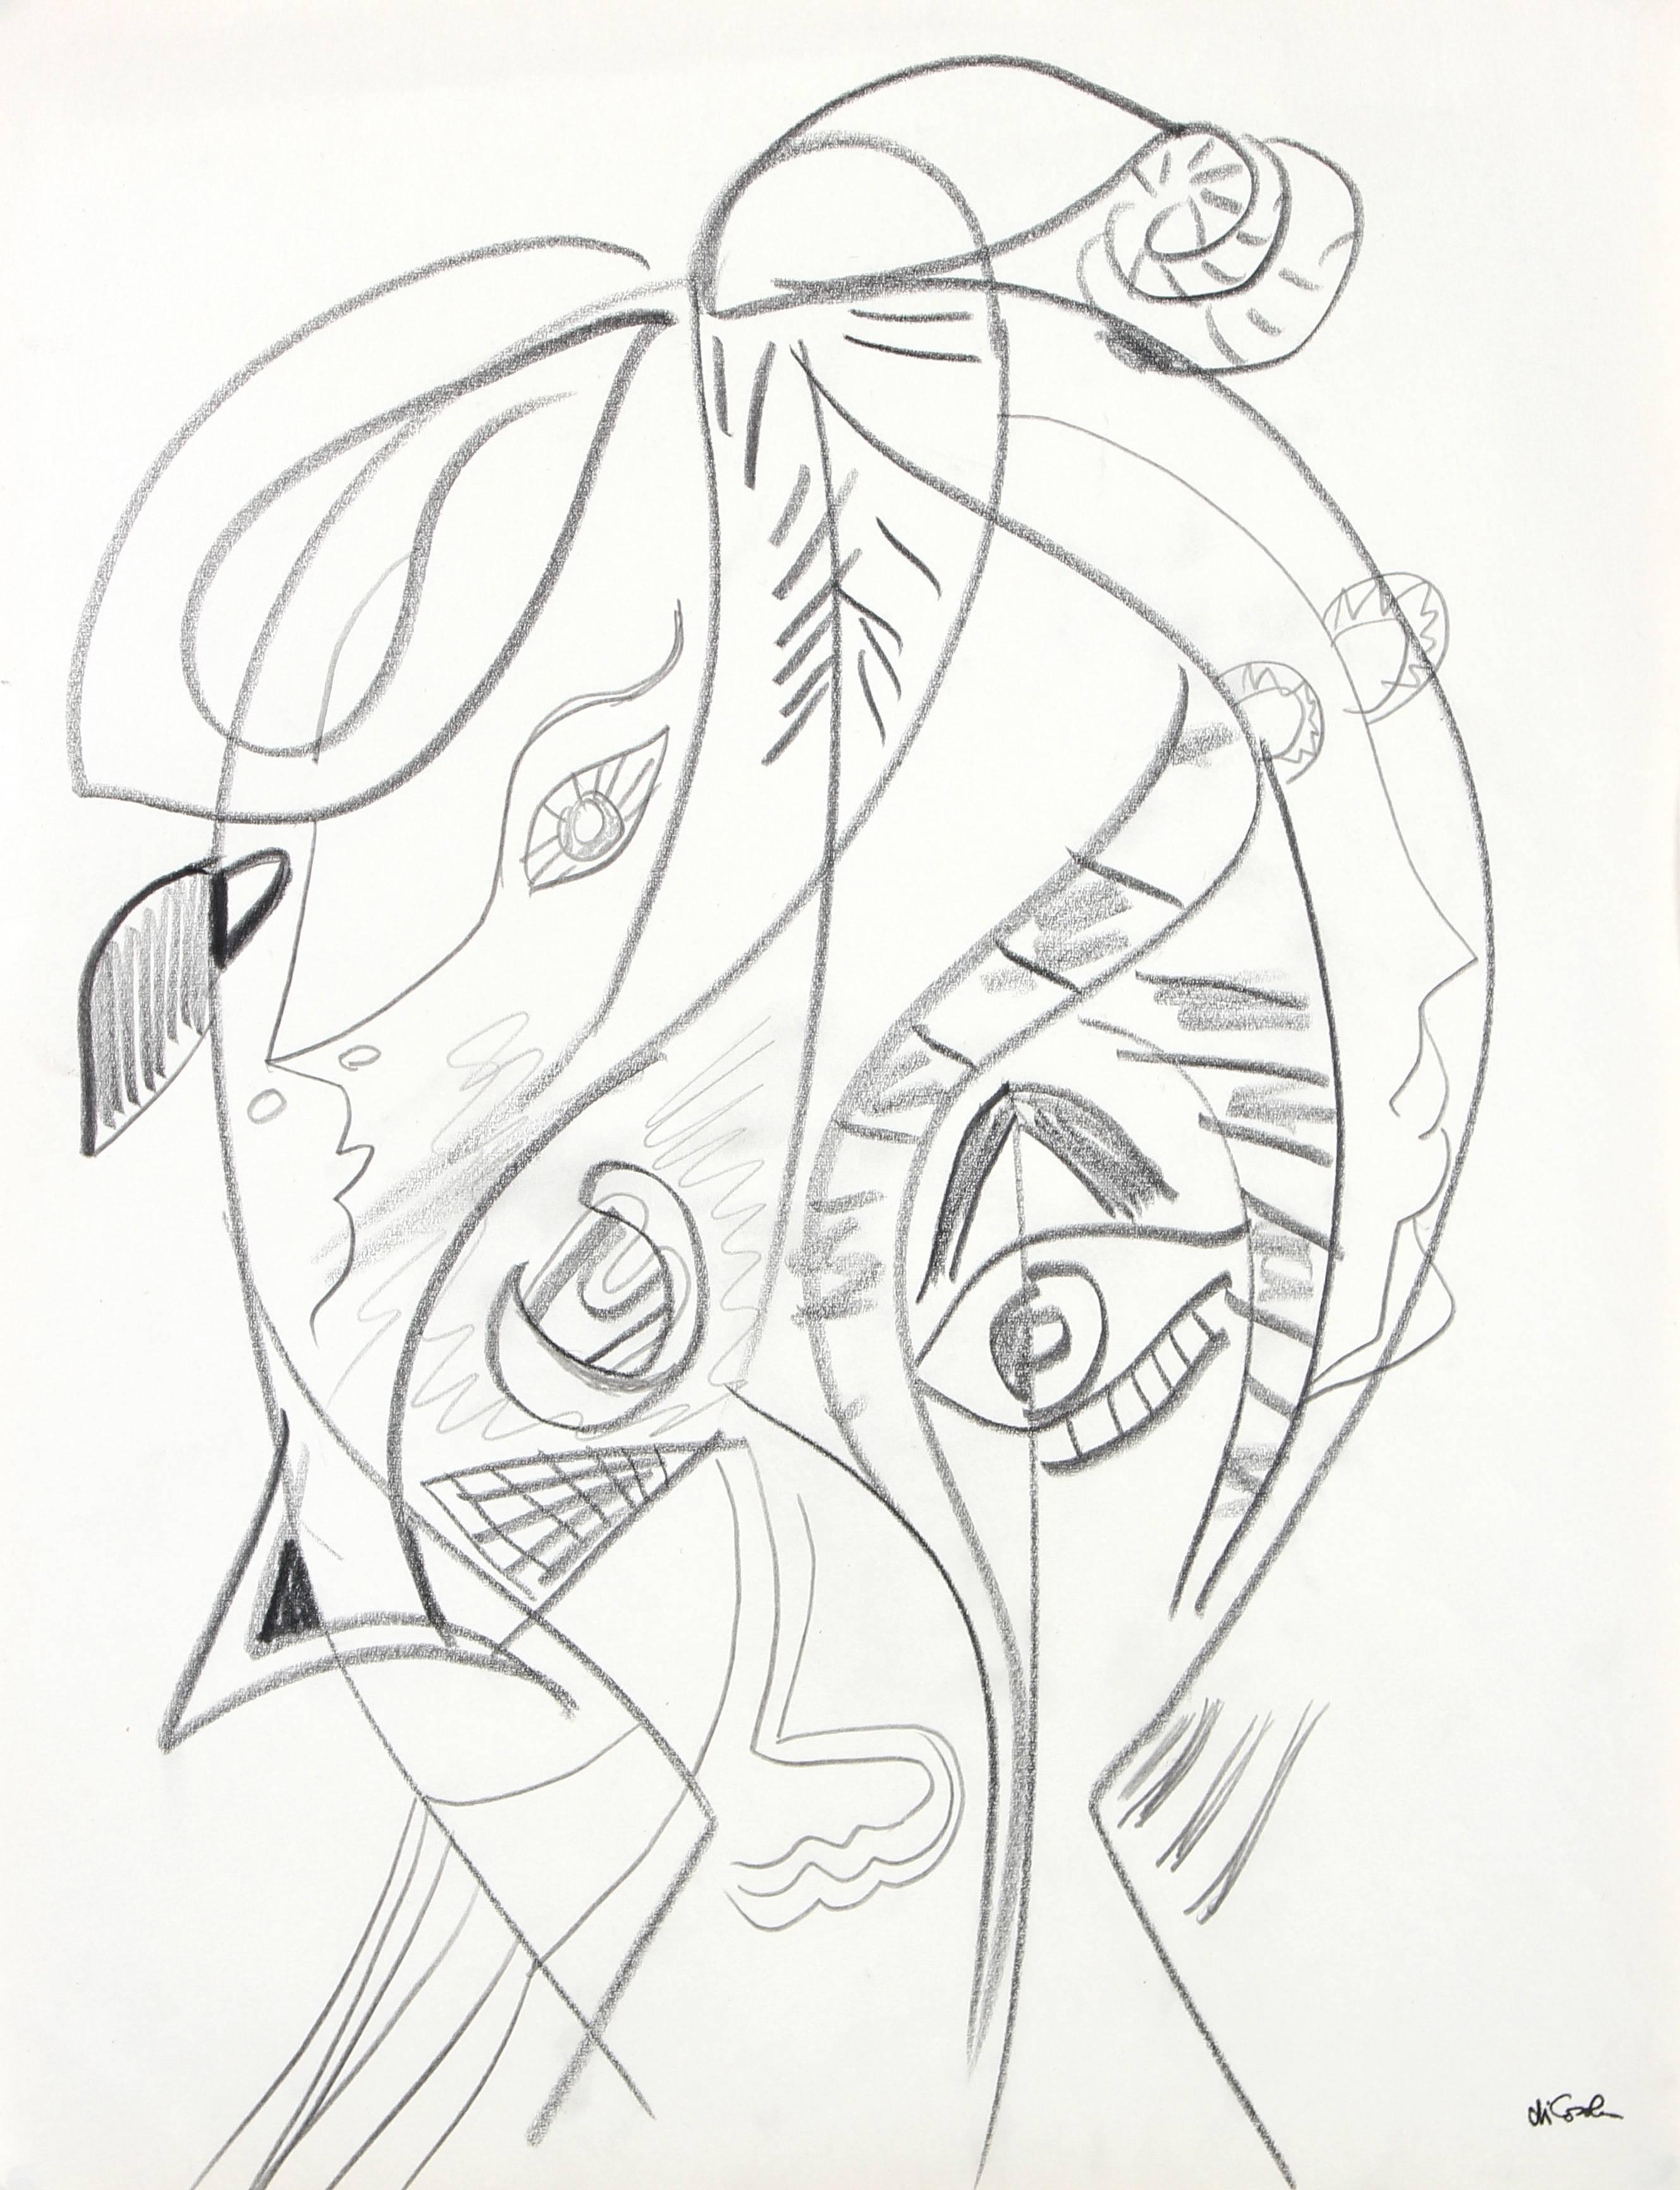 Michael di Cosola Abstract Drawing – Abstraktes Porträt der Moderne in Graphit, 20. Jahrhundert